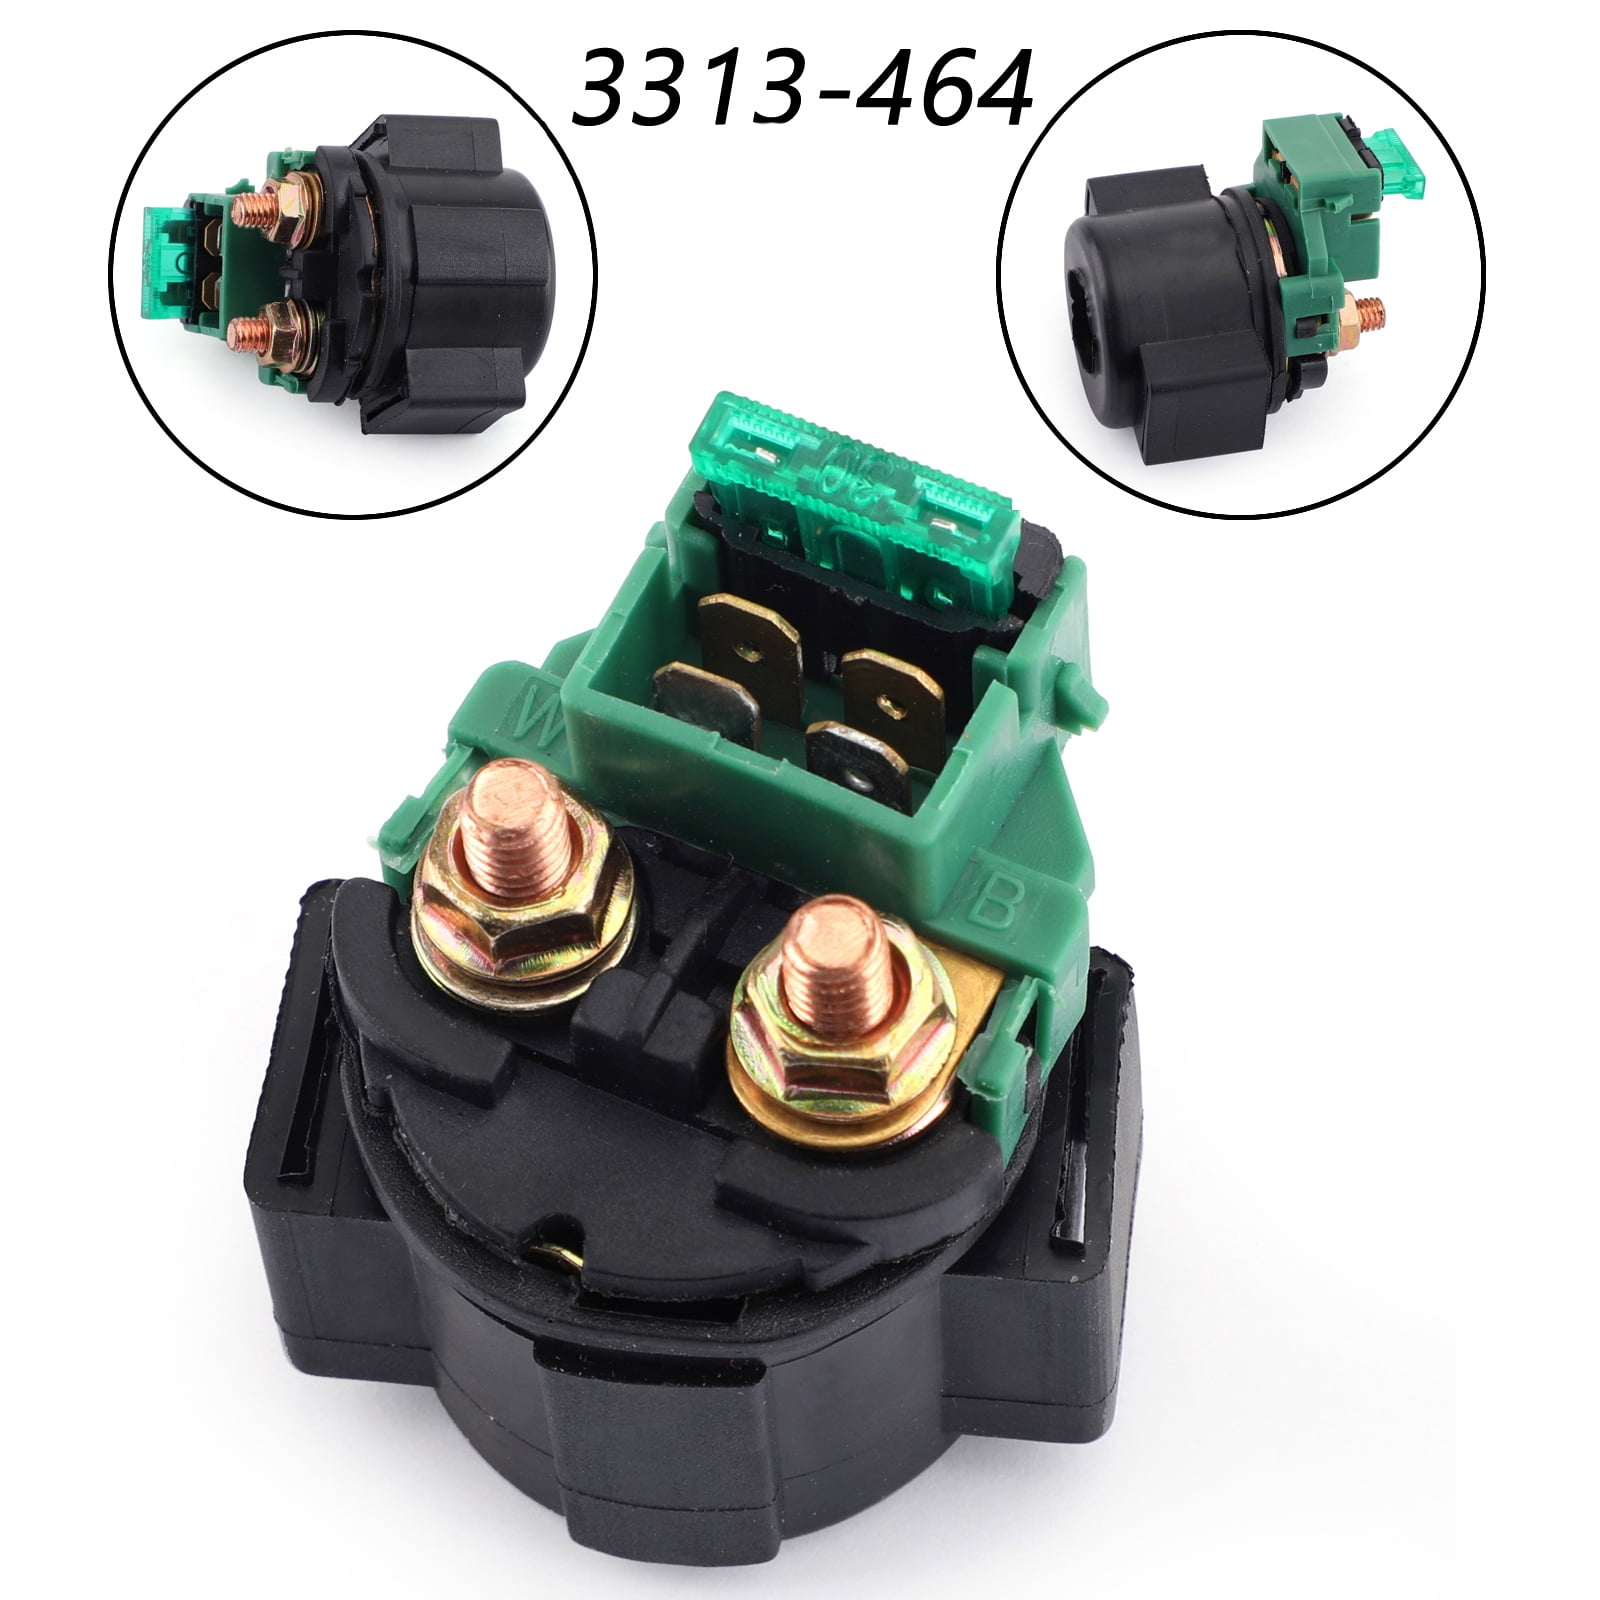 WFLNHB Starter Solenoid Relay Fit for Arctic Cat 366 350 400 450 425 ATV Replace 3313-464 